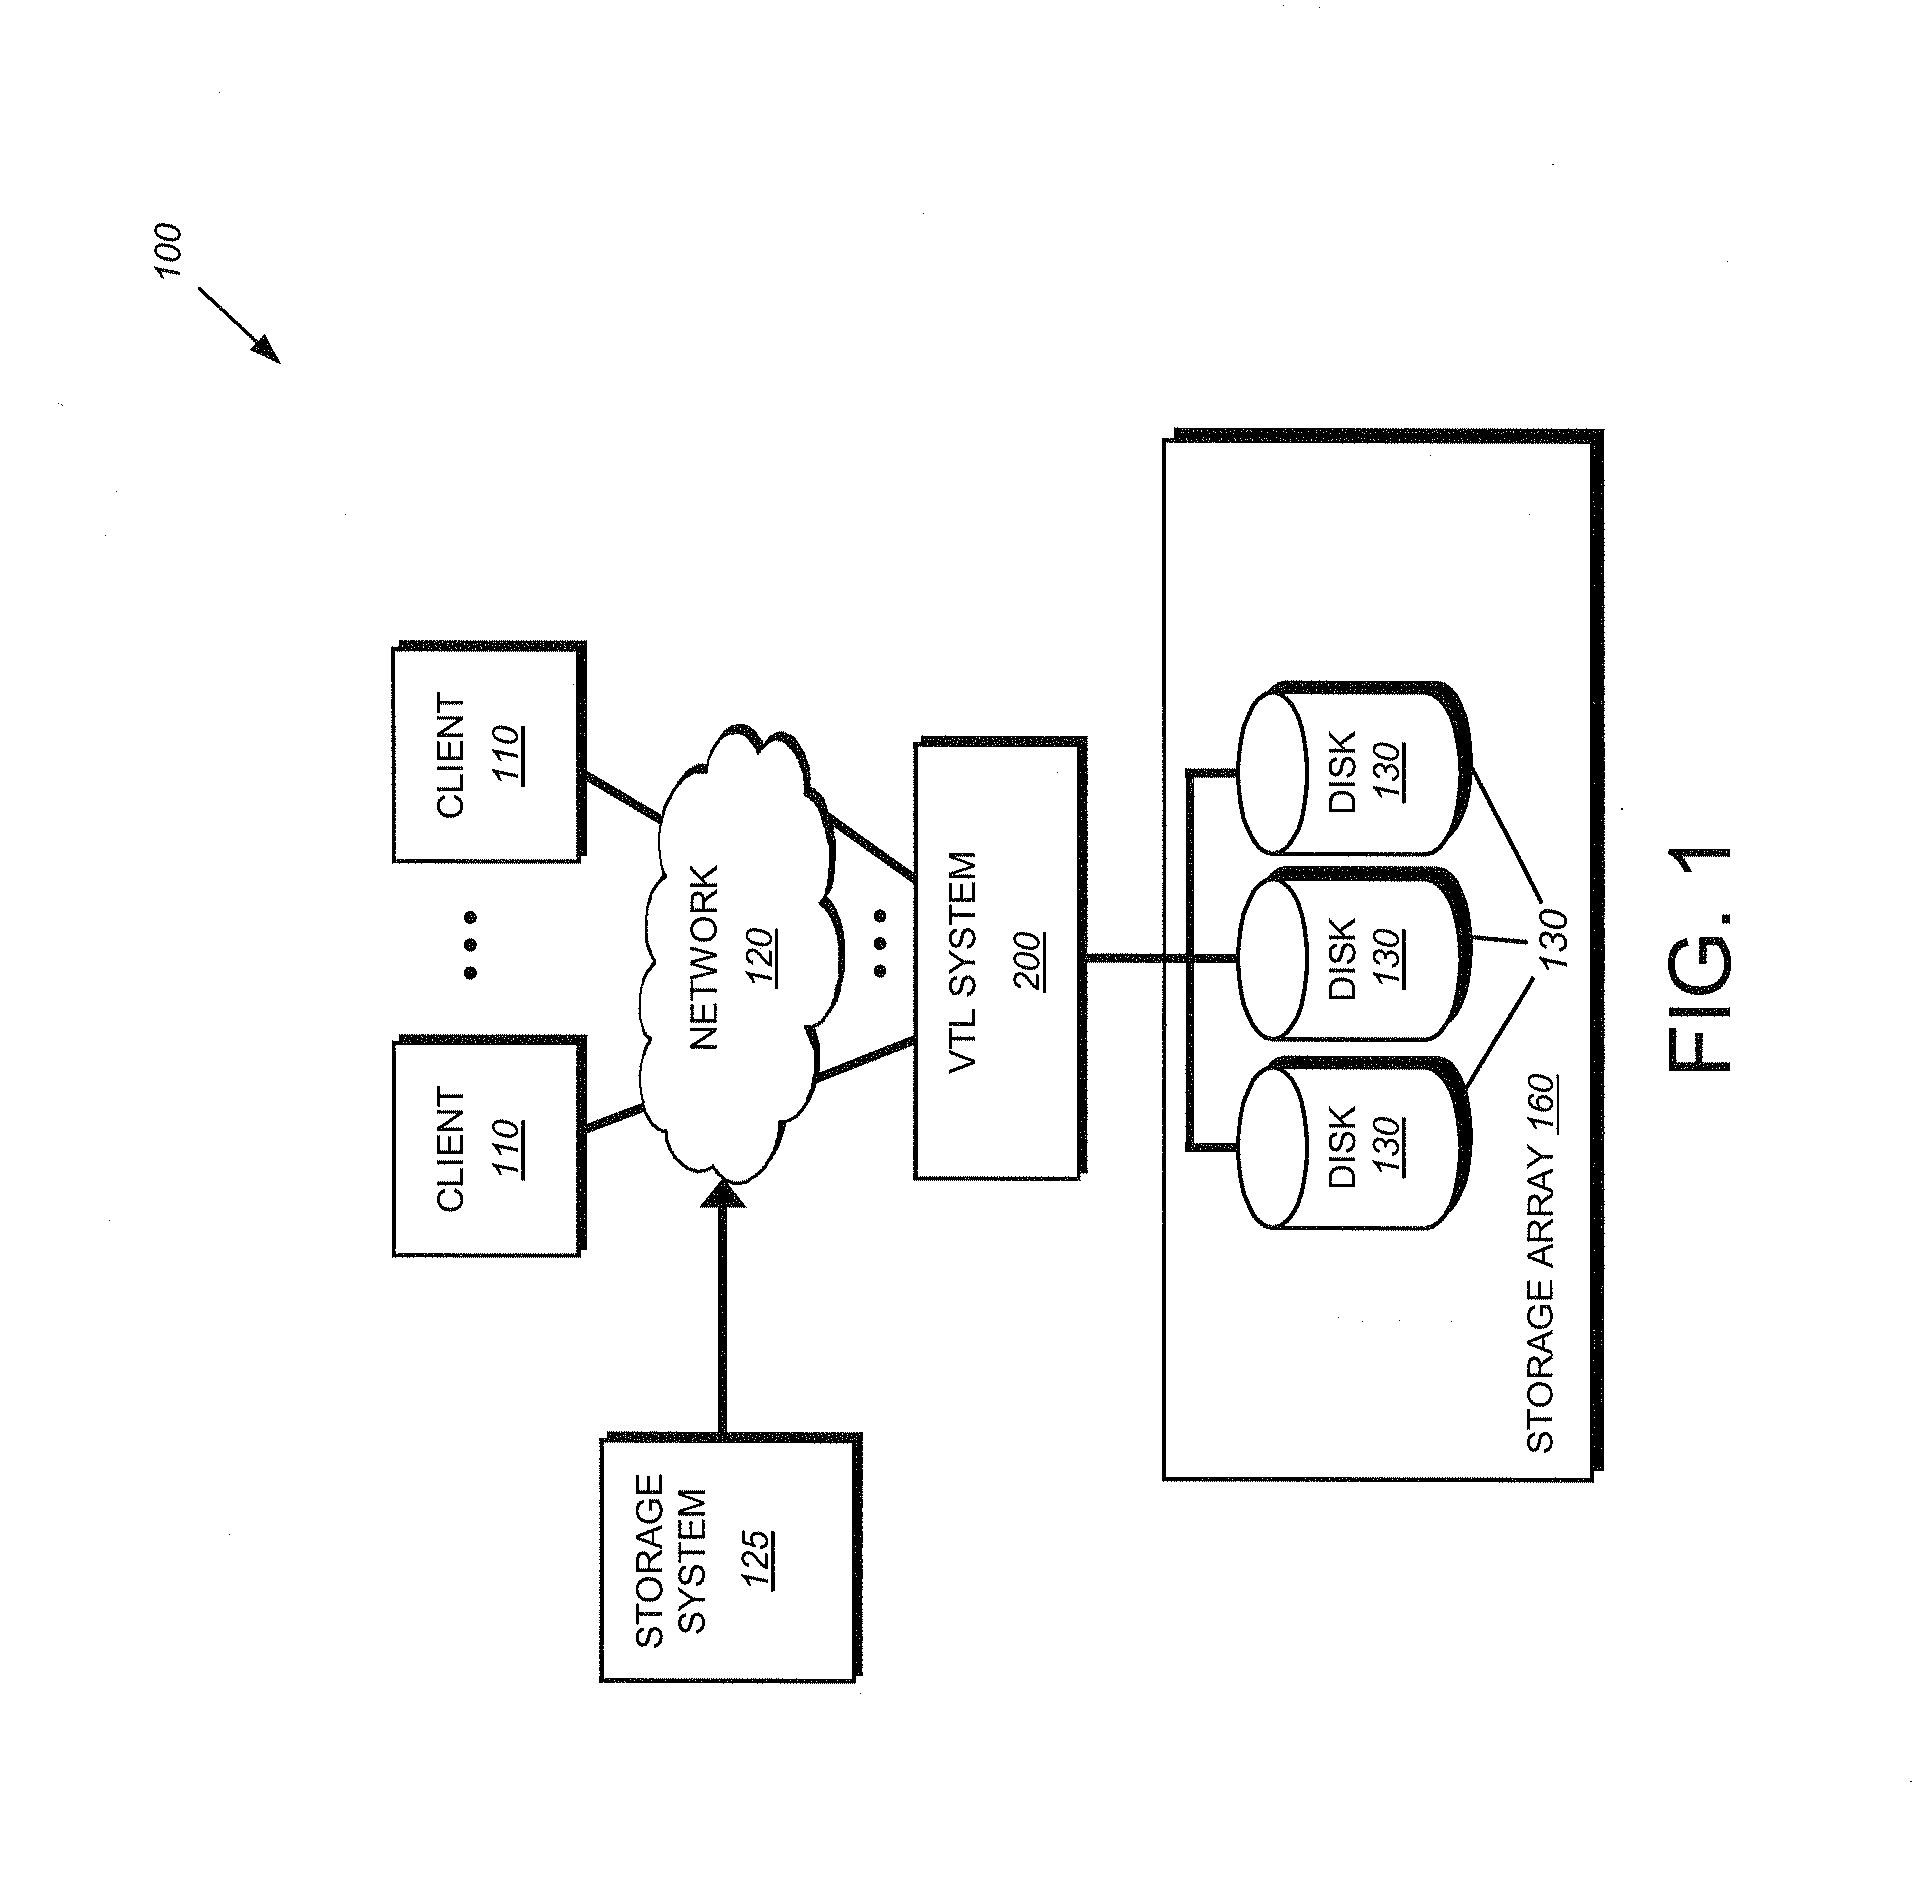 System and method for accelerating anchor point detection